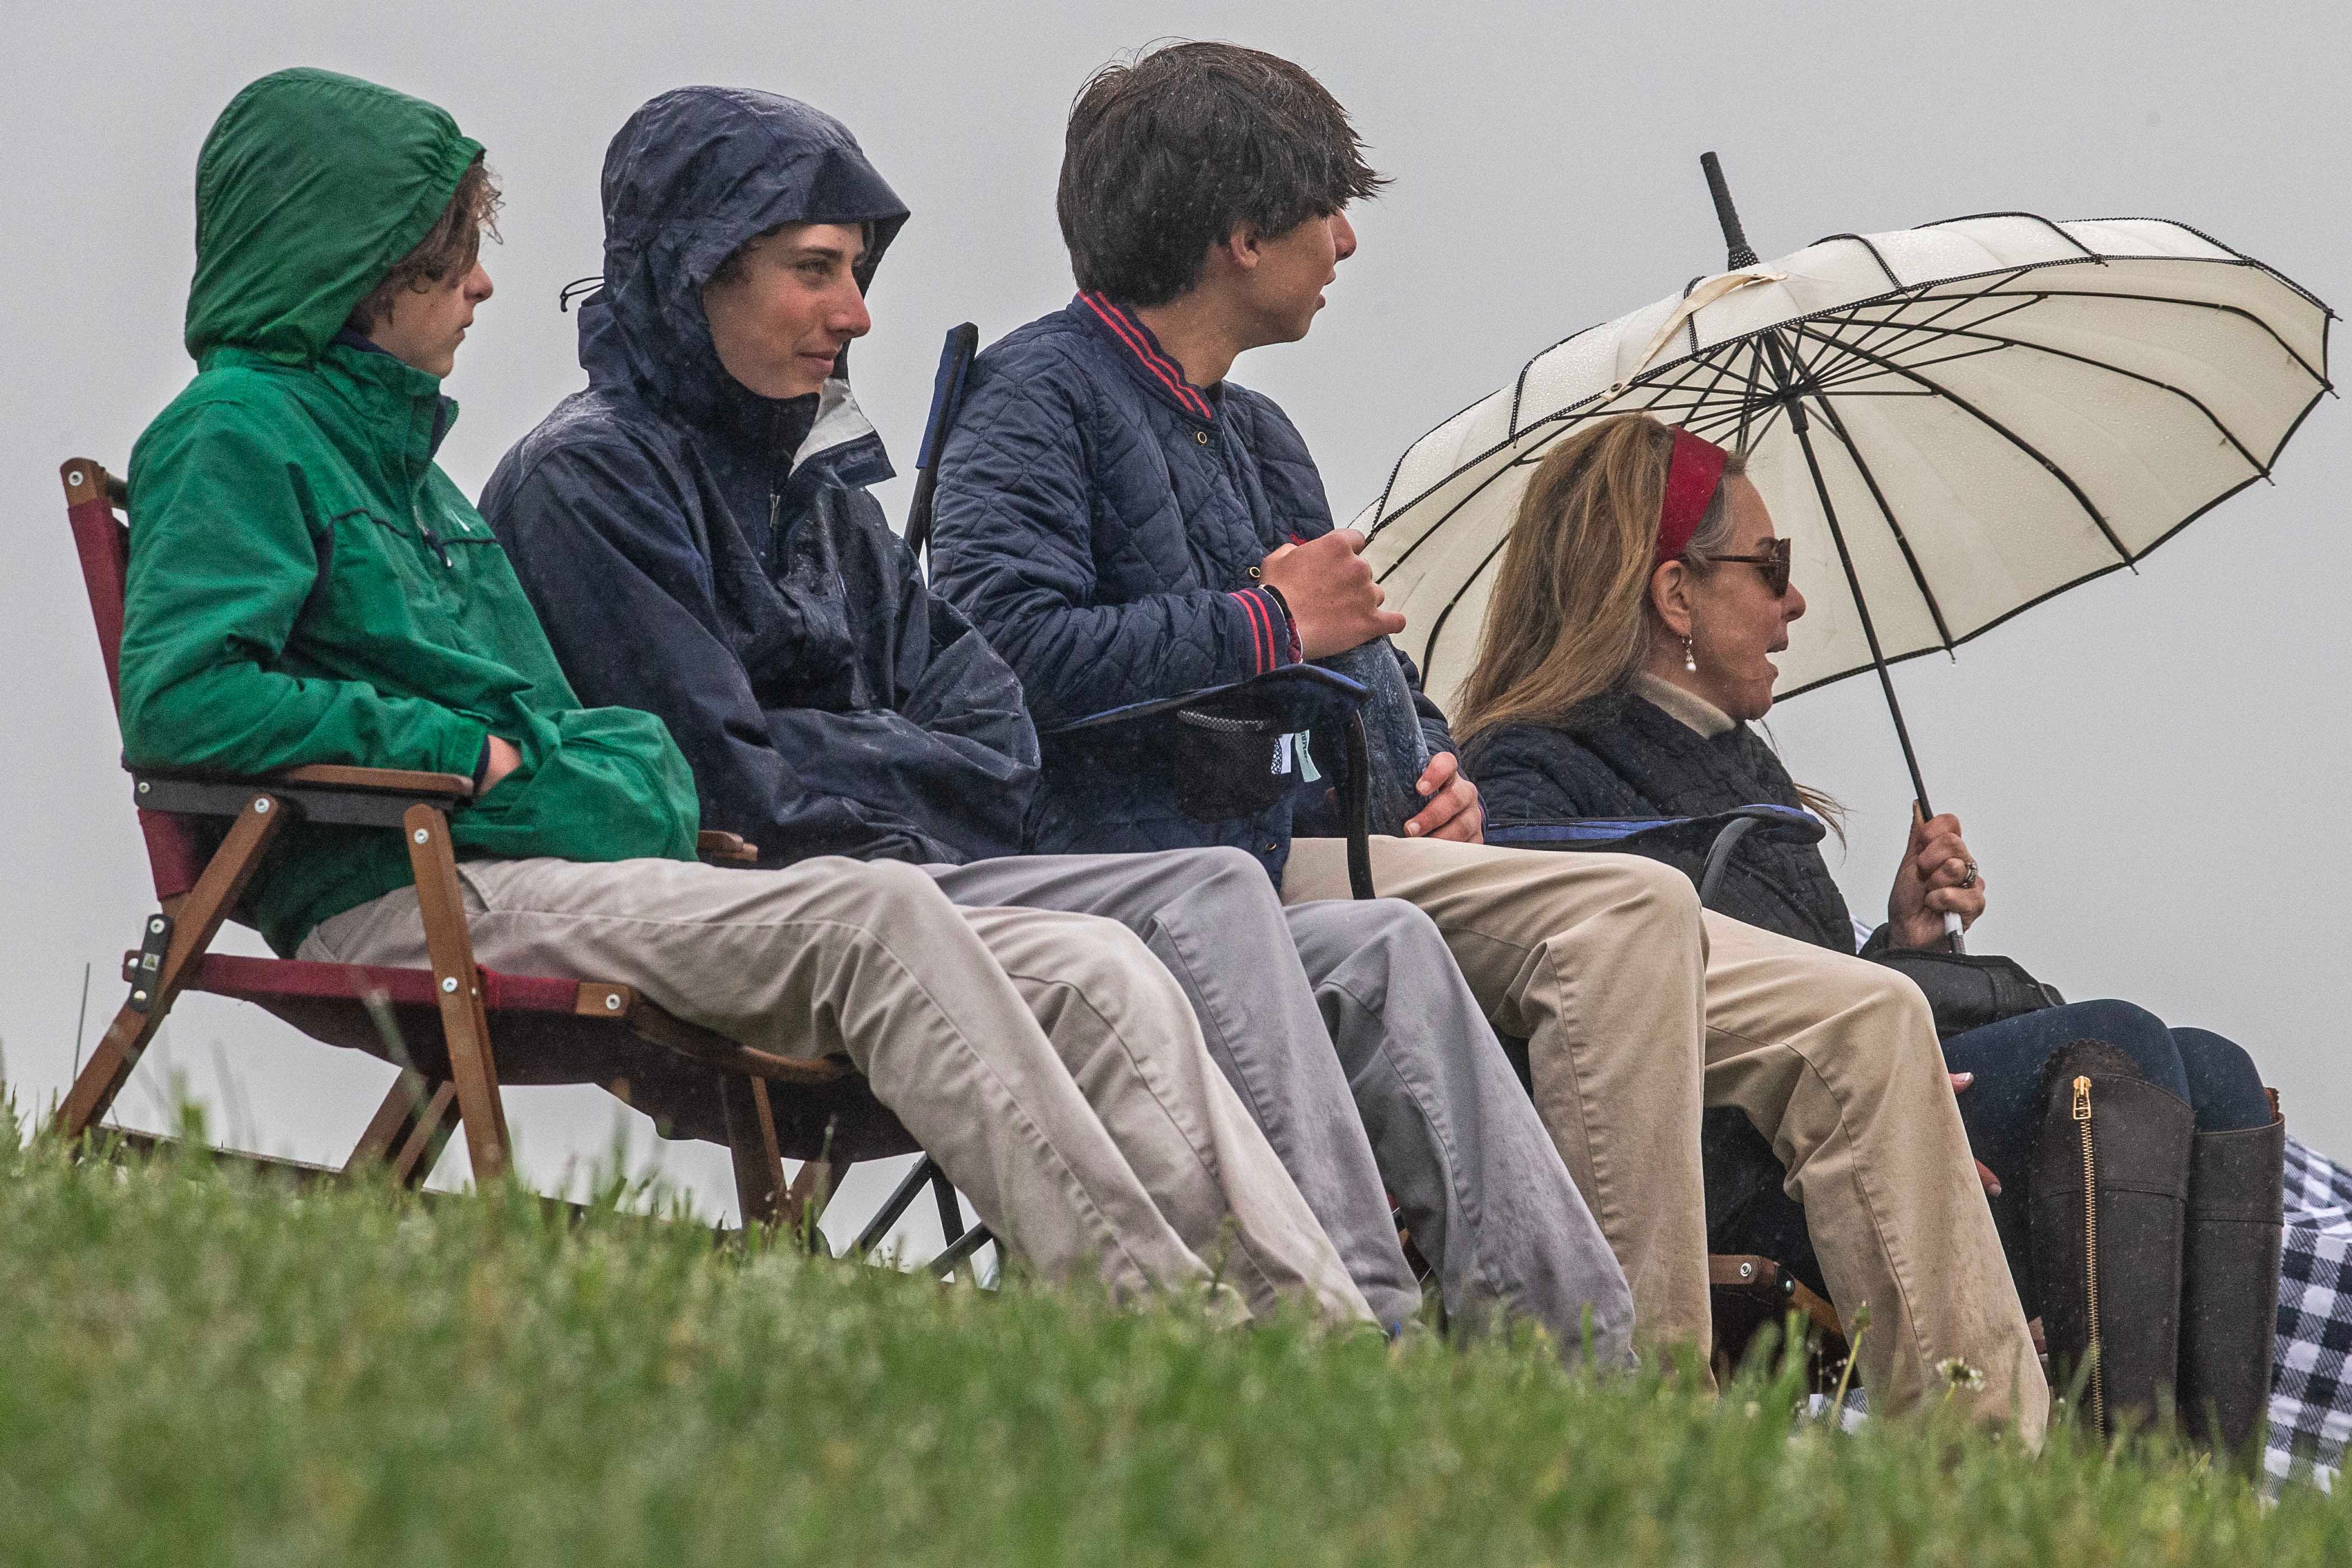 Grab your raincoats, Delaware. It's going to be a dreary weekend with rain, cloudy skies